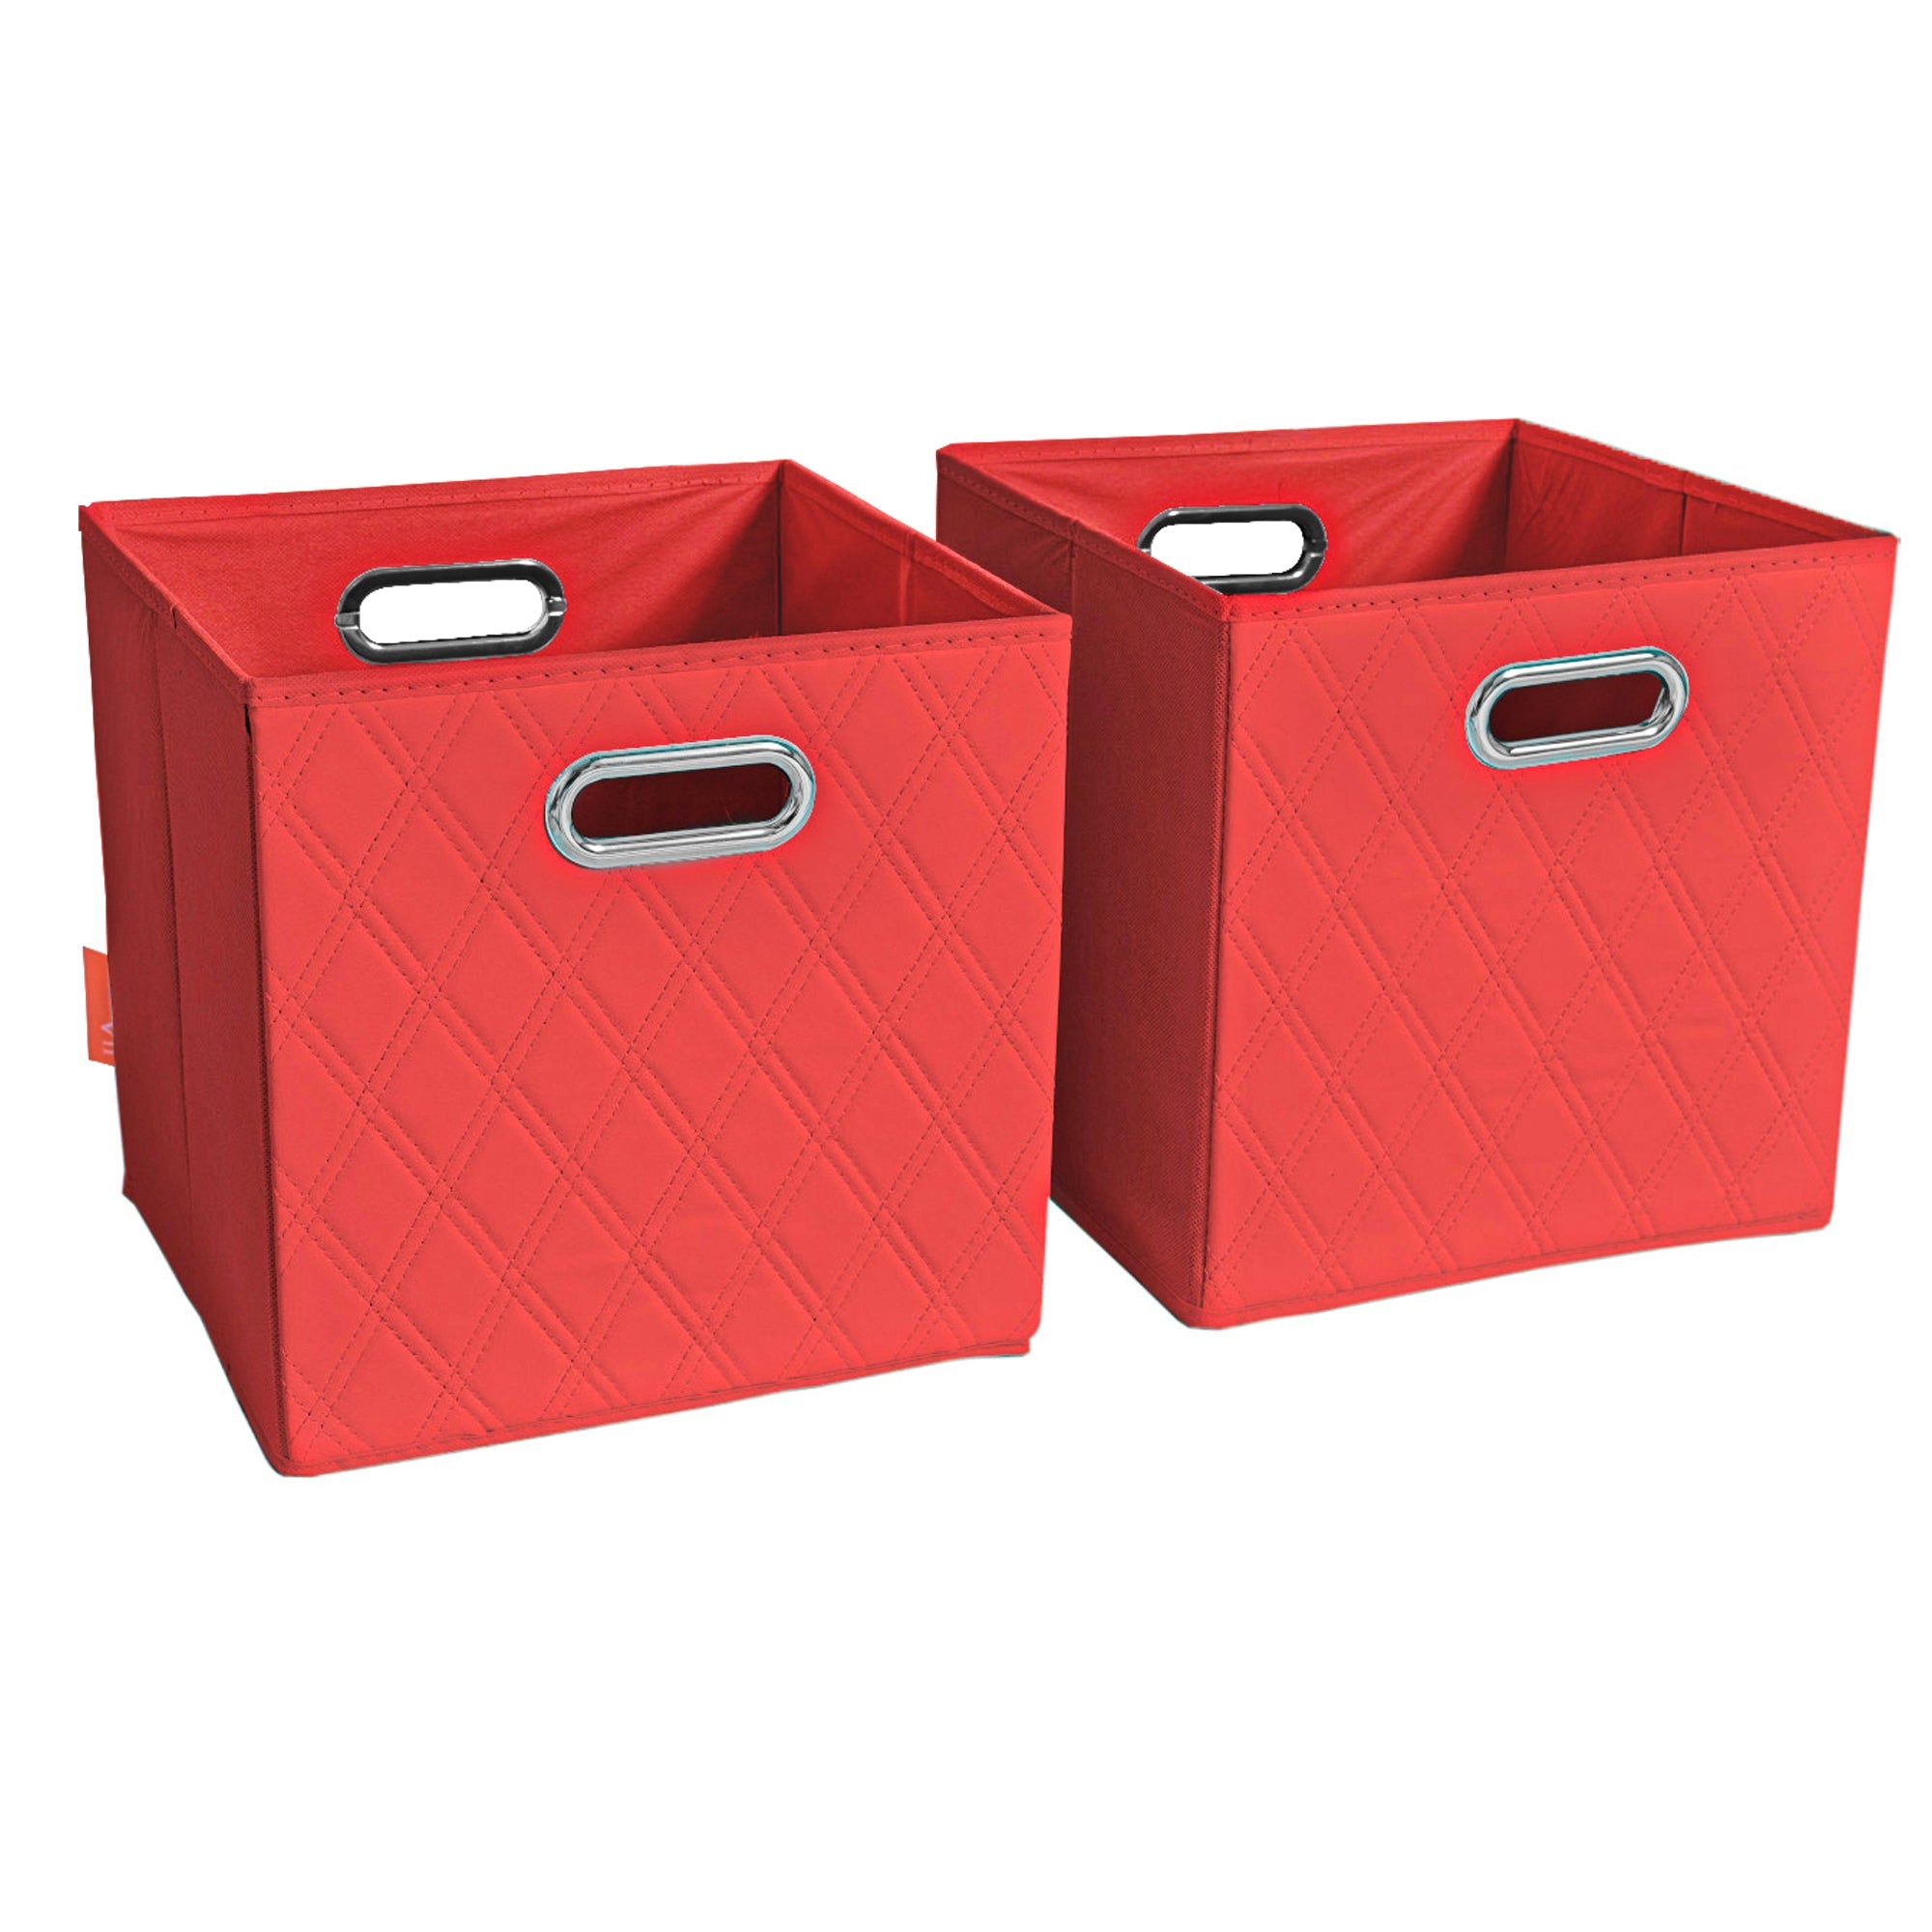 JIAessentials 11 inch Foldable Diamond Patterned Faux Leather Storage Cube Bins Set of Two with Dual Handles - 11" Red